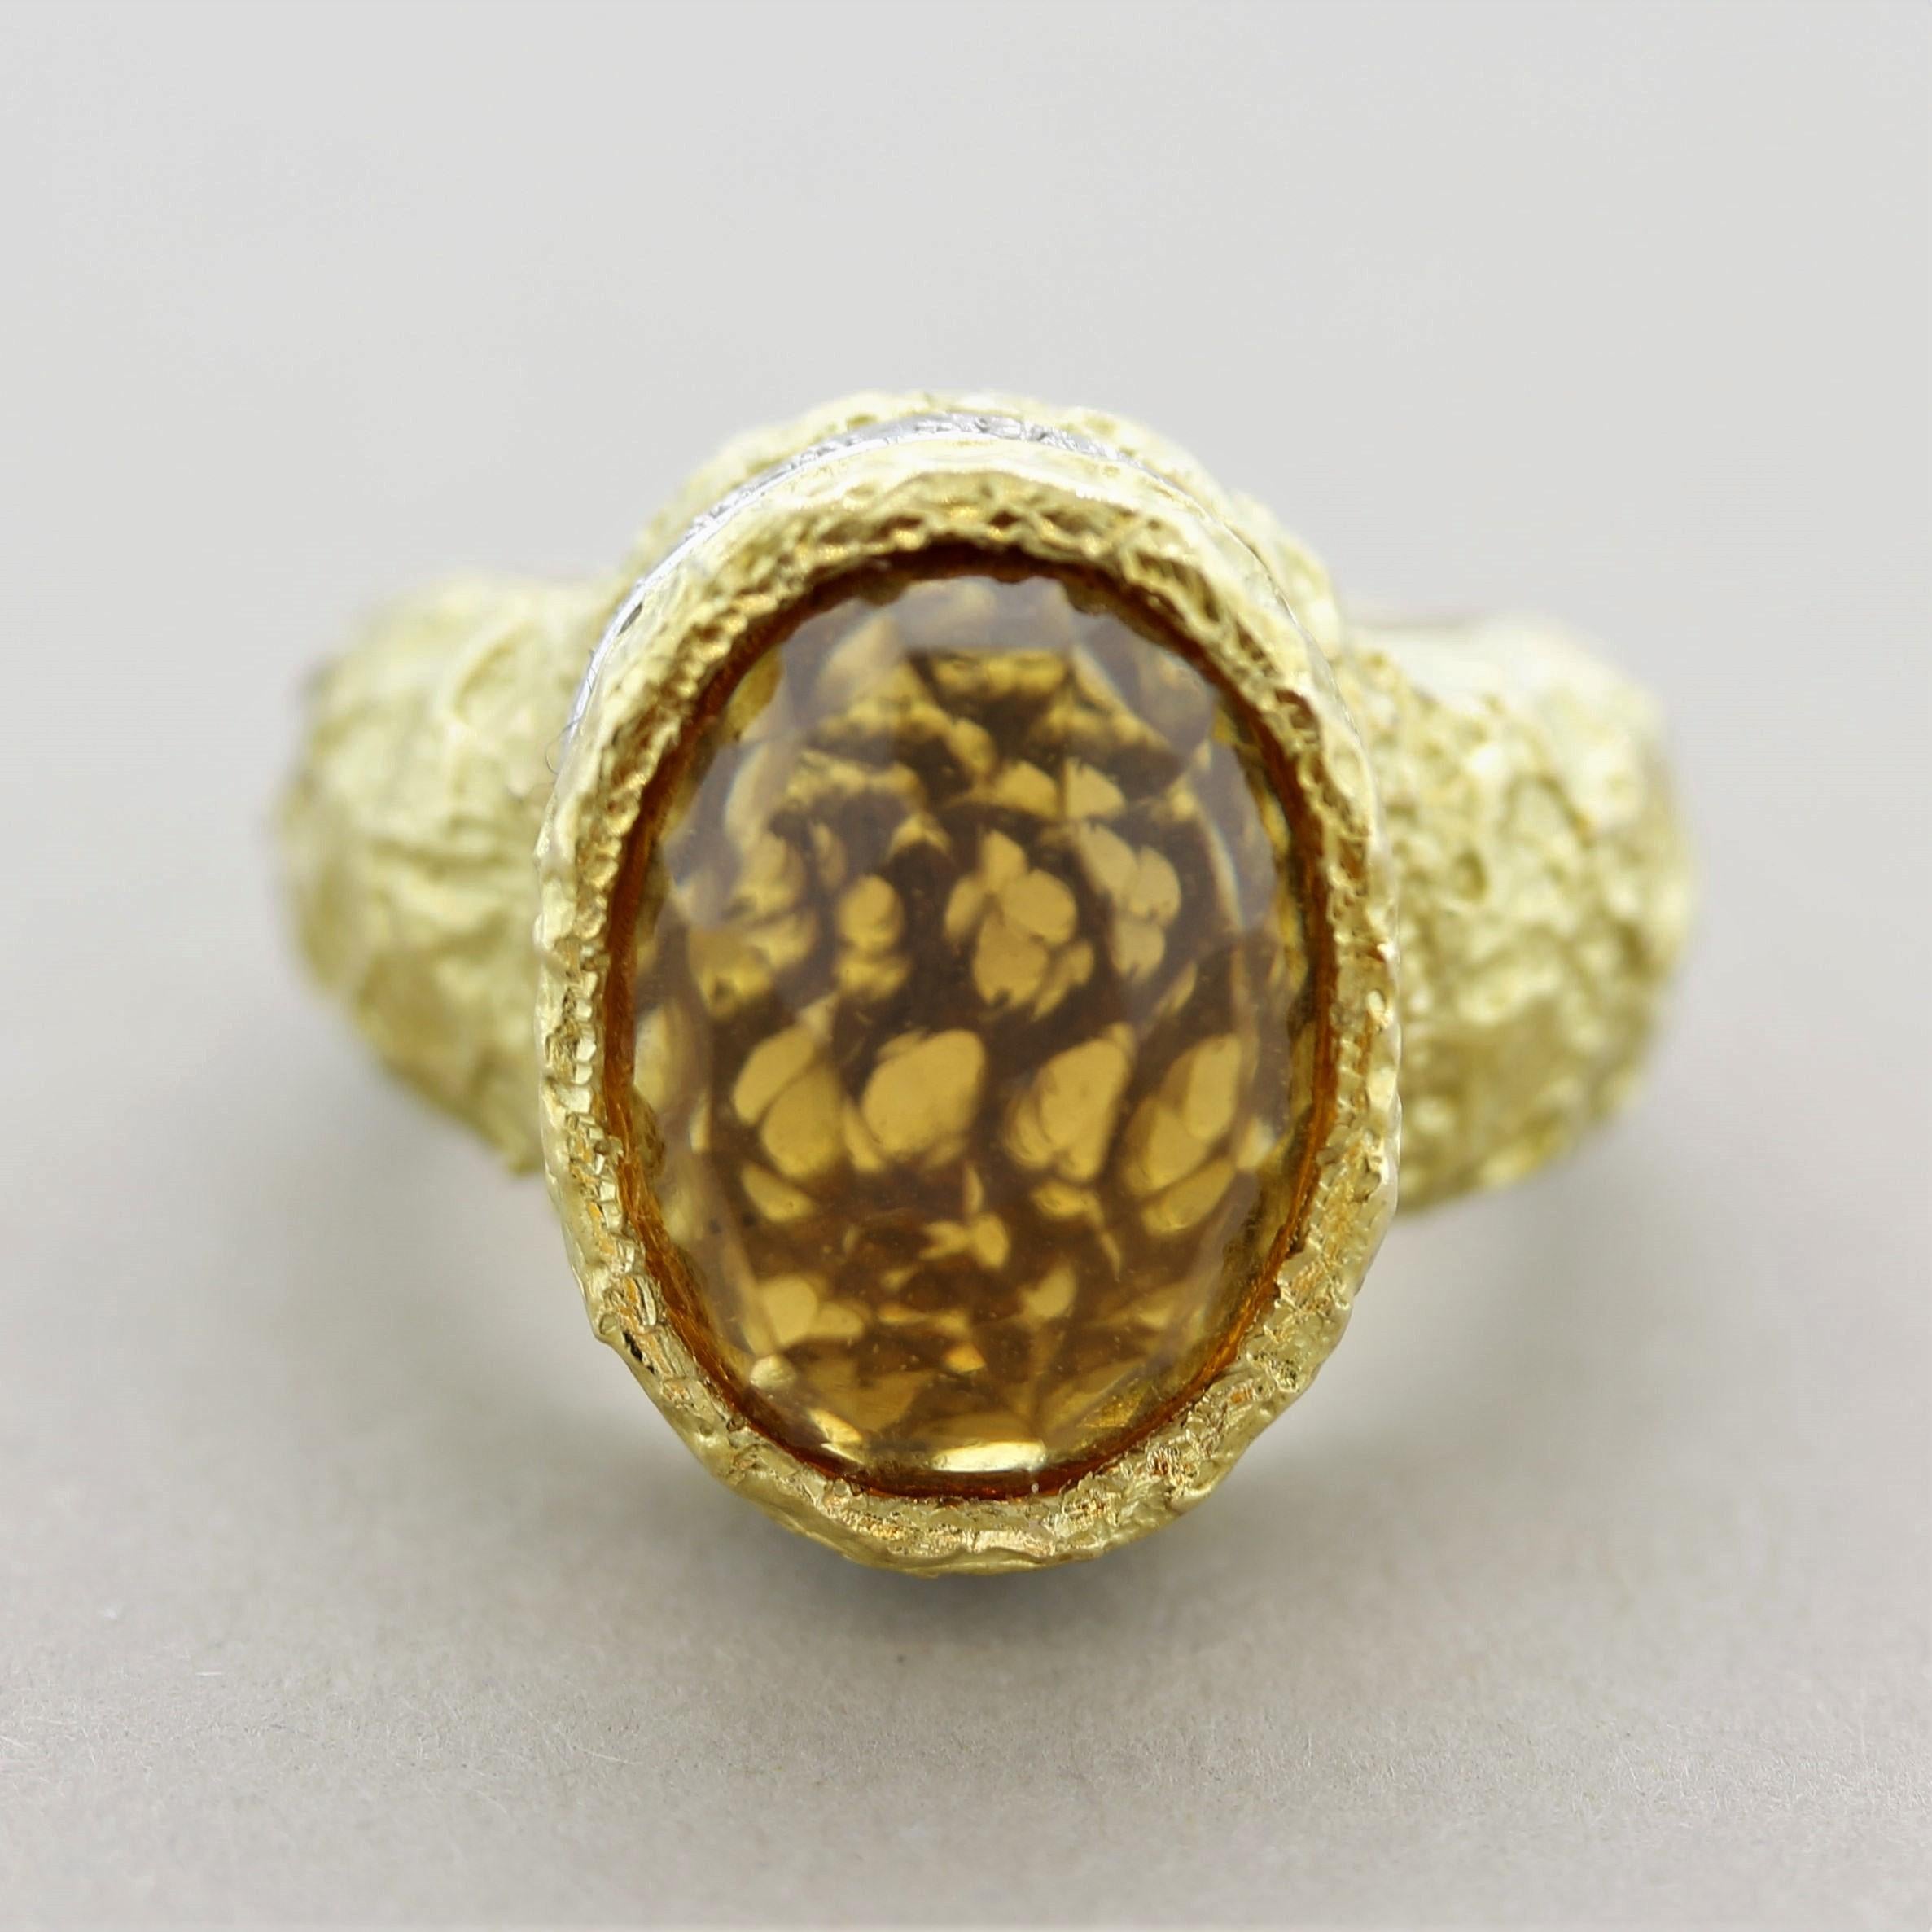 A large citrine weighing 11 carats! It is dome-shaped and has a unique rose-cut with a vivid yellowish-orange color. Accenting the ring are 0.45 carats of round brilliant-cut diamonds set below the citrine in white gold. Hand-fabricated in 18k gold